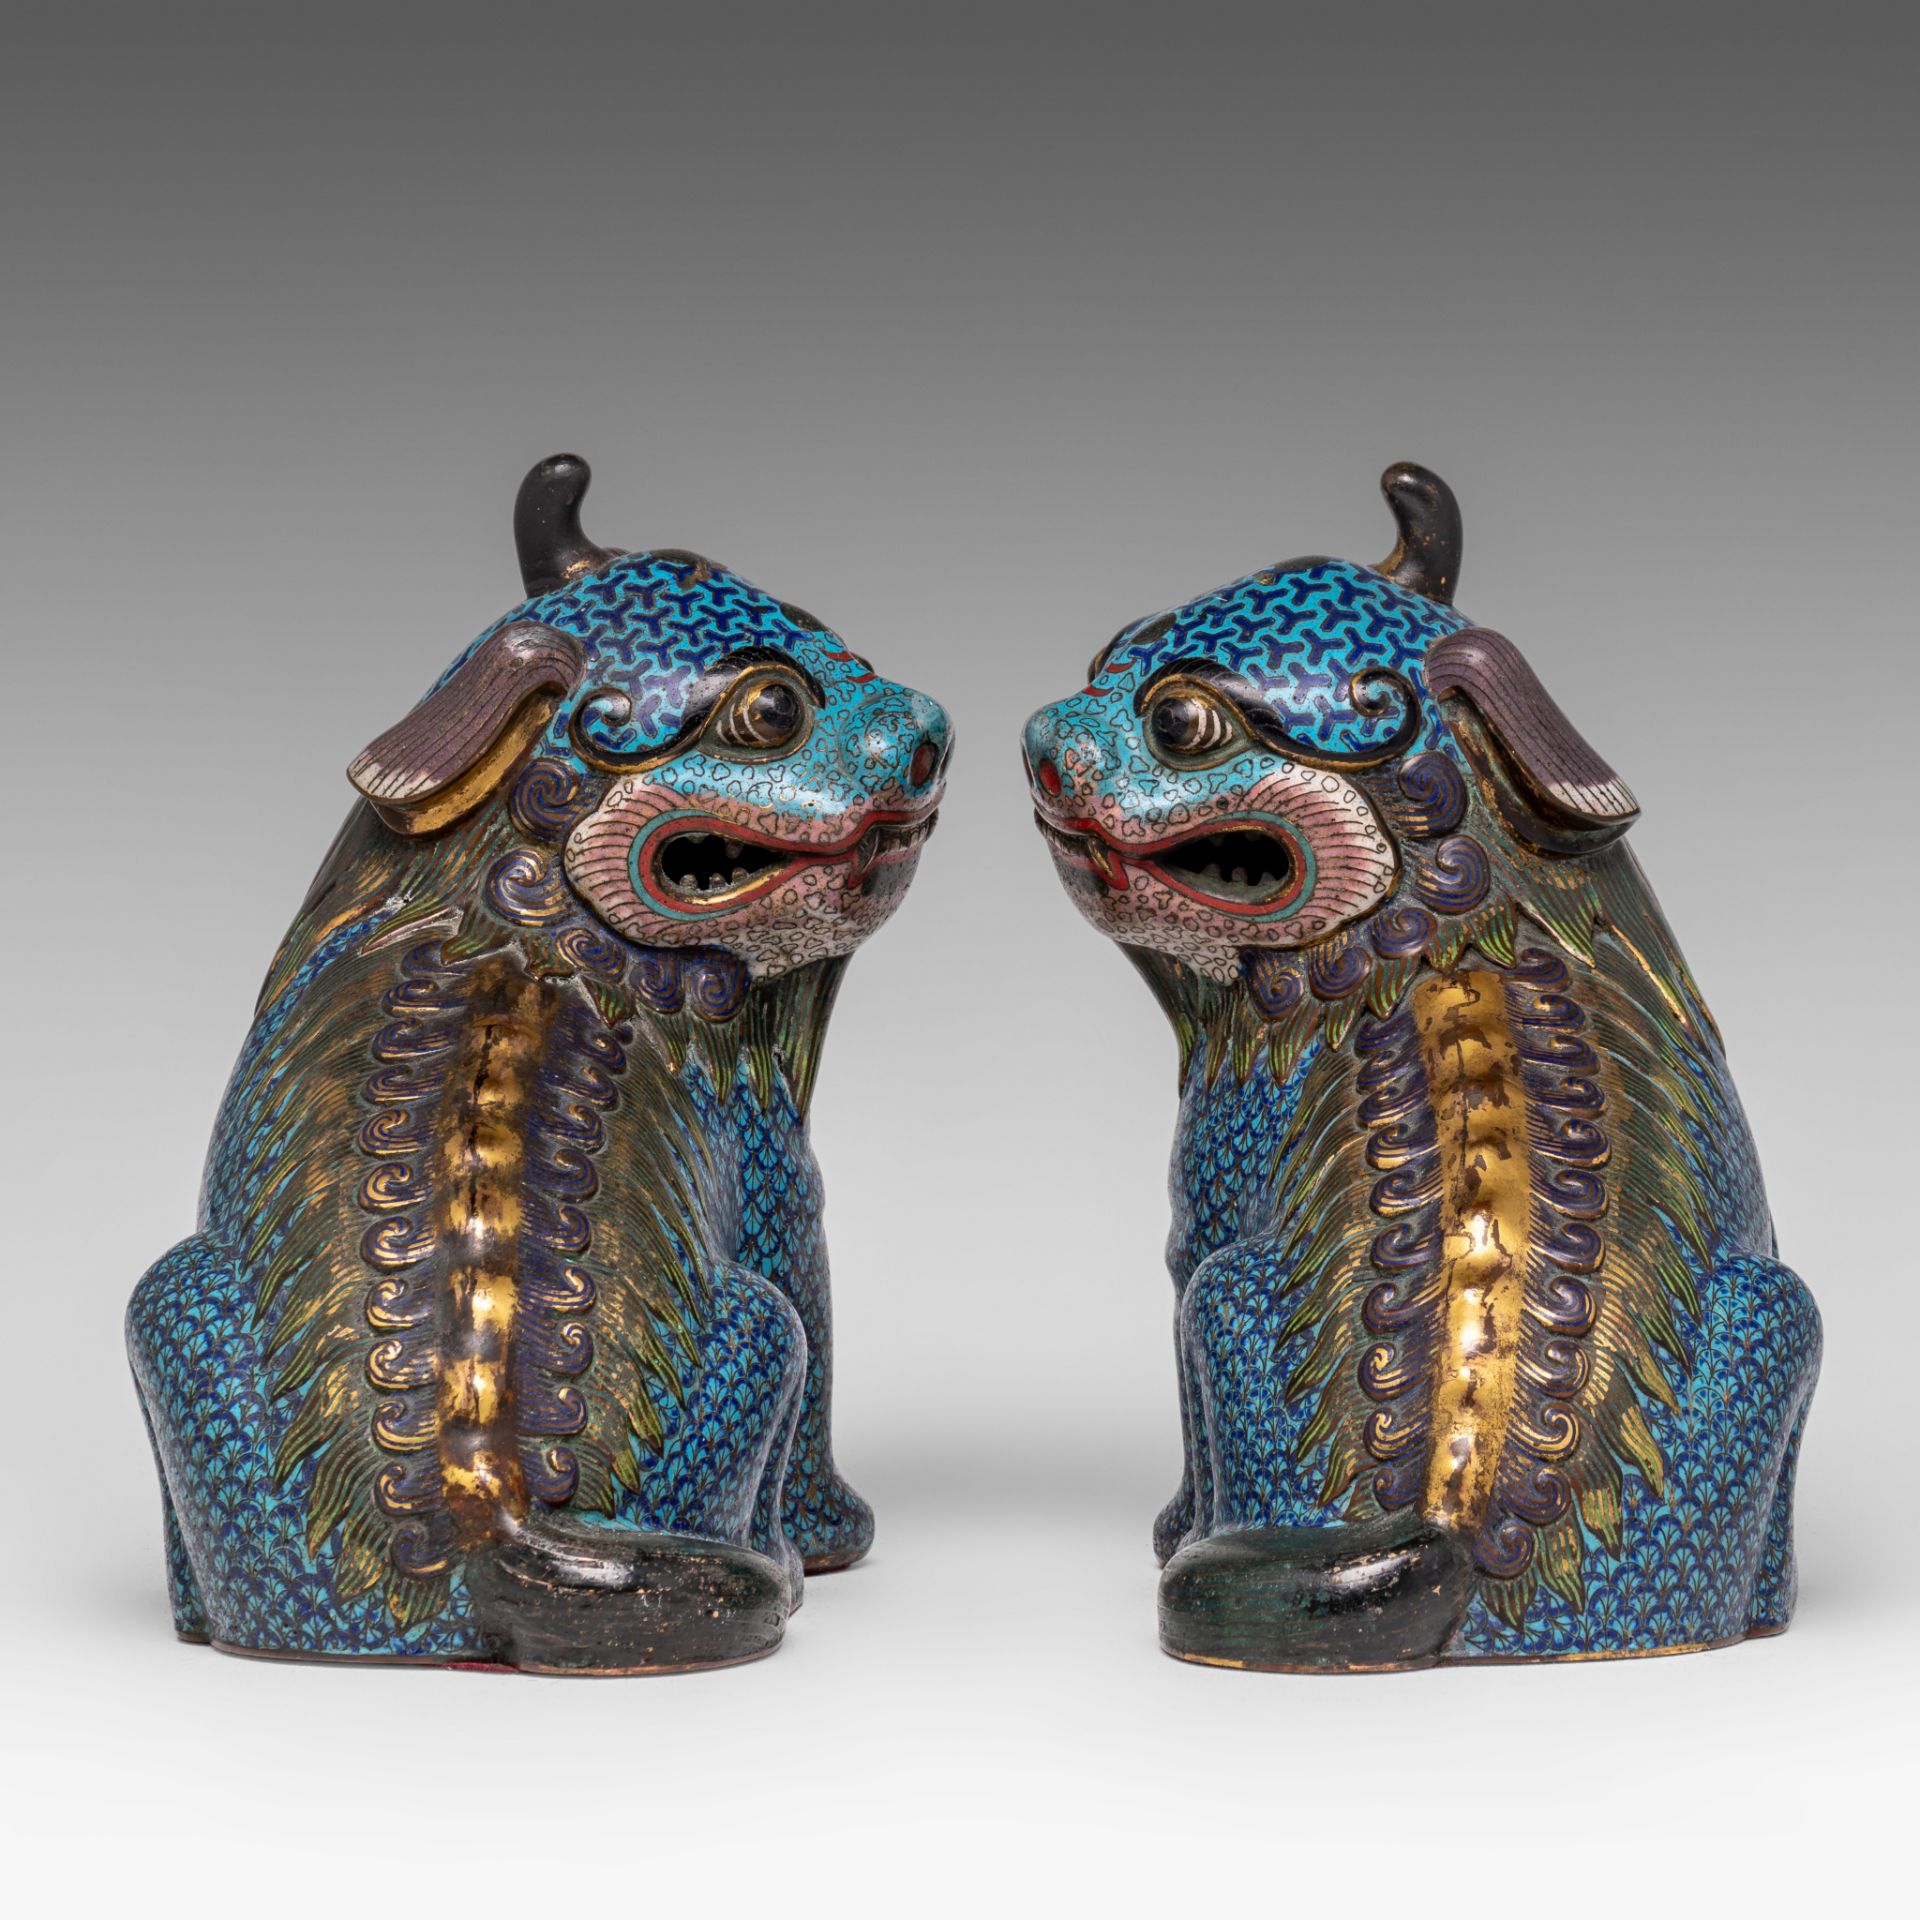 A pair of Chinese cloisonne enamelled figures of a Qilin, late Qing, L 20 - H 21 cm - Weight g - Image 5 of 7